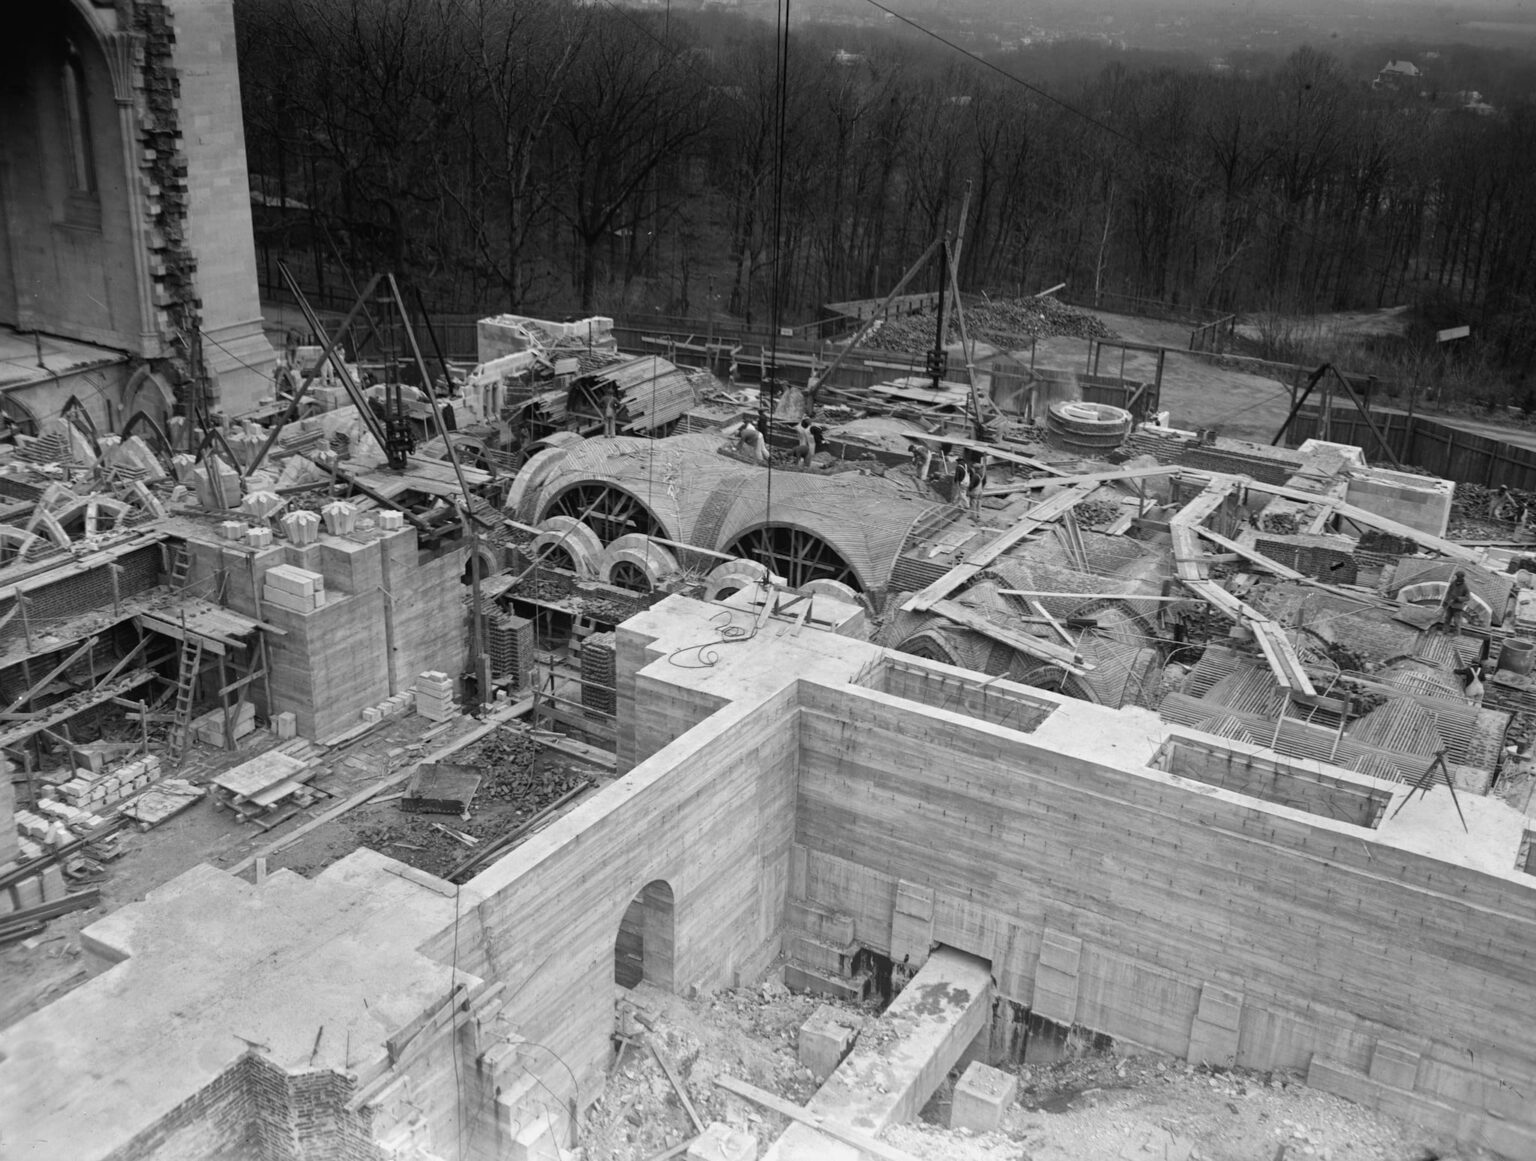 A Unique Look at the National Cathedral Under Construction in 1925